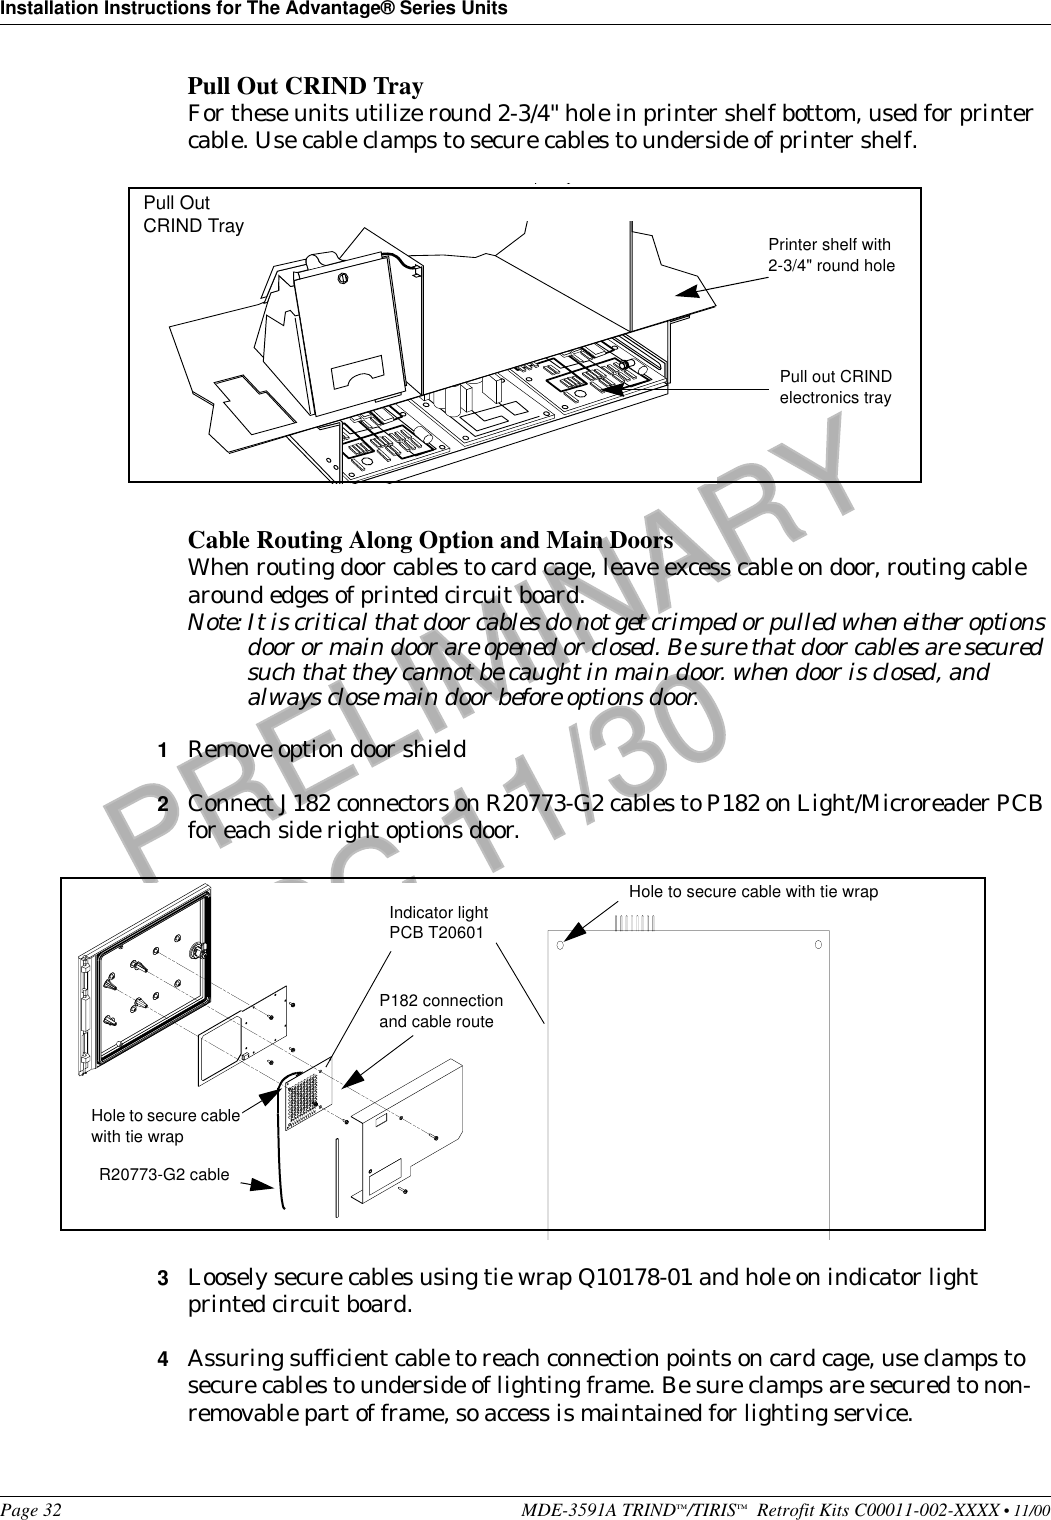 Installation Instructions for The Advantage® Series UnitsPage 32 MDE-3591A TRIND™/TIRIS™  Retrofit Kits C00011-002-XXXX • 11/00PRELIMINARYFCC 11/30Pull Out CRIND TrayFor these units utilize round 2-3/4&quot; hole in printer shelf bottom, used for printer cable. Use cable clamps to secure cables to underside of printer shelf.Cable Routing Along Option and Main DoorsWhen routing door cables to card cage, leave excess cable on door, routing cable around edges of printed circuit board.Note: It is critical that door cables do not get crimped or pulled when either options door or main door are opened or closed. Be sure that door cables are secured such that they cannot be caught in main door. when door is closed, and always close main door before options door.1Remove option door shield2Connect J182 connectors on R20773-G2 cables to P182 on Light/Microreader PCB for each side right options door.3Loosely secure cables using tie wrap Q10178-01 and hole on indicator light printed circuit board.4Assuring sufficient cable to reach connection points on card cage, use clamps to secure cables to underside of lighting frame. Be sure clamps are secured to non-removable part of frame, so access is maintained for lighting service. Printer shelf with 2-3/4&quot; round holePull out CRIND electronics trayPull Out CRIND TrayIndicator light PCB T20601P182 connection and cable routeHole to secure cable with tie wrapHole to secure cable with tie wrapR20773-G2 cable